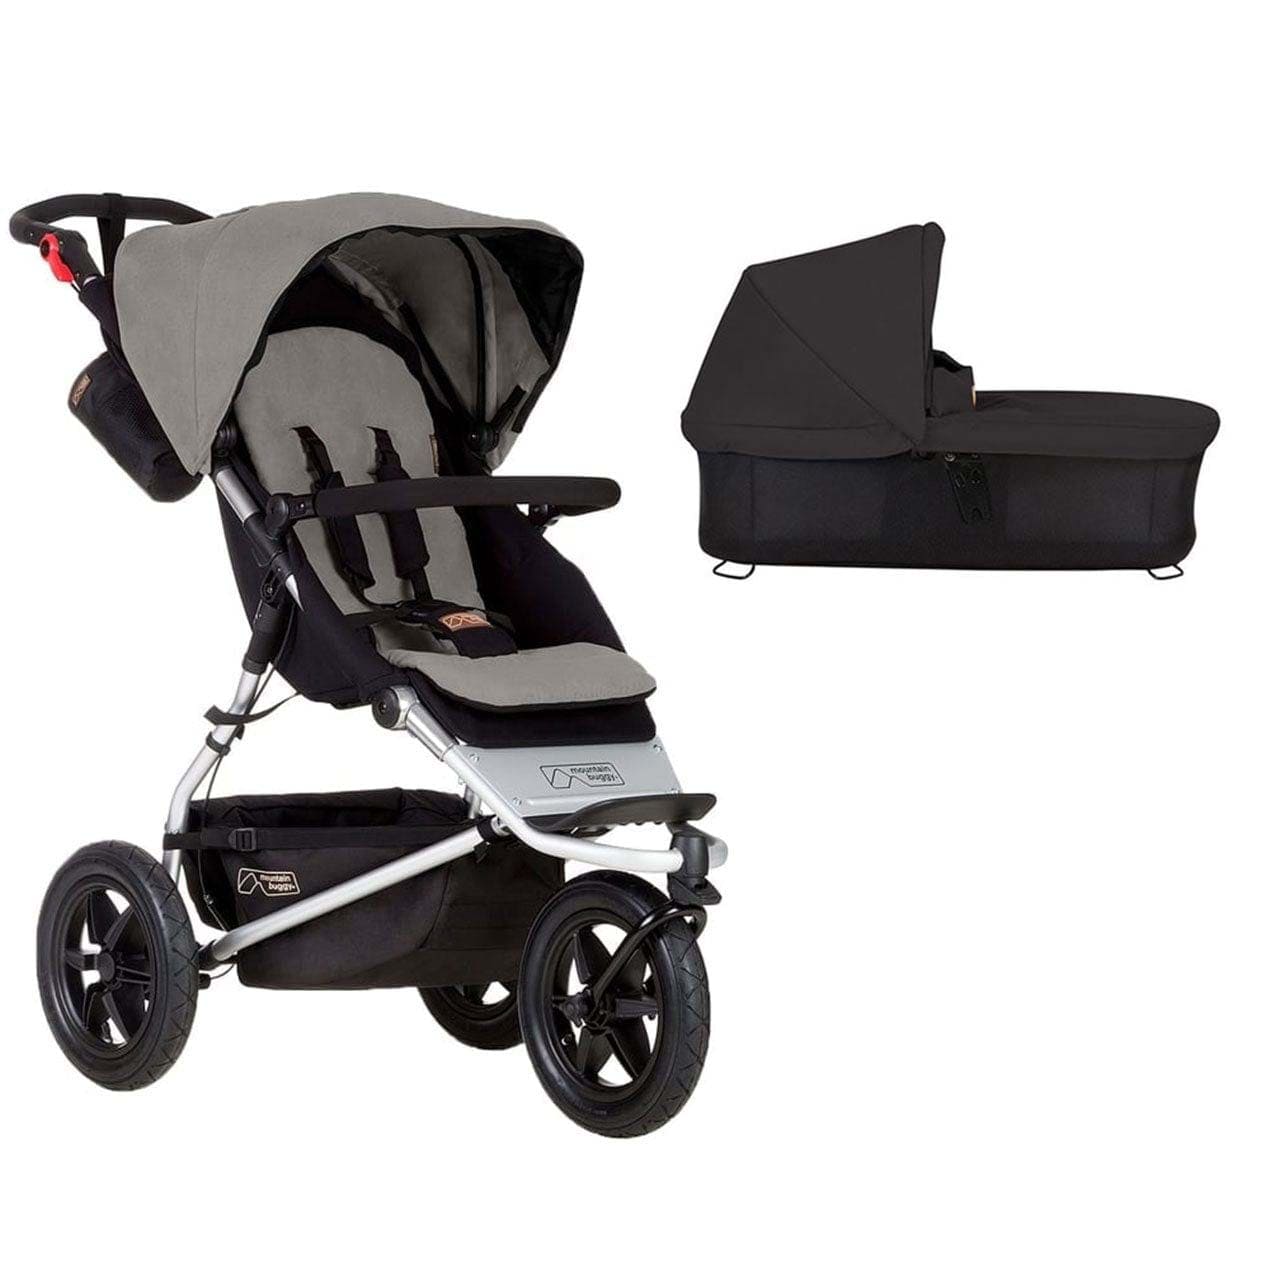 Mountain Buggy Baby Strollers Mountain Buggy Urban Jungle 3 Wheeled Pushchair with Free Carrycot - Silver 12203-SIL